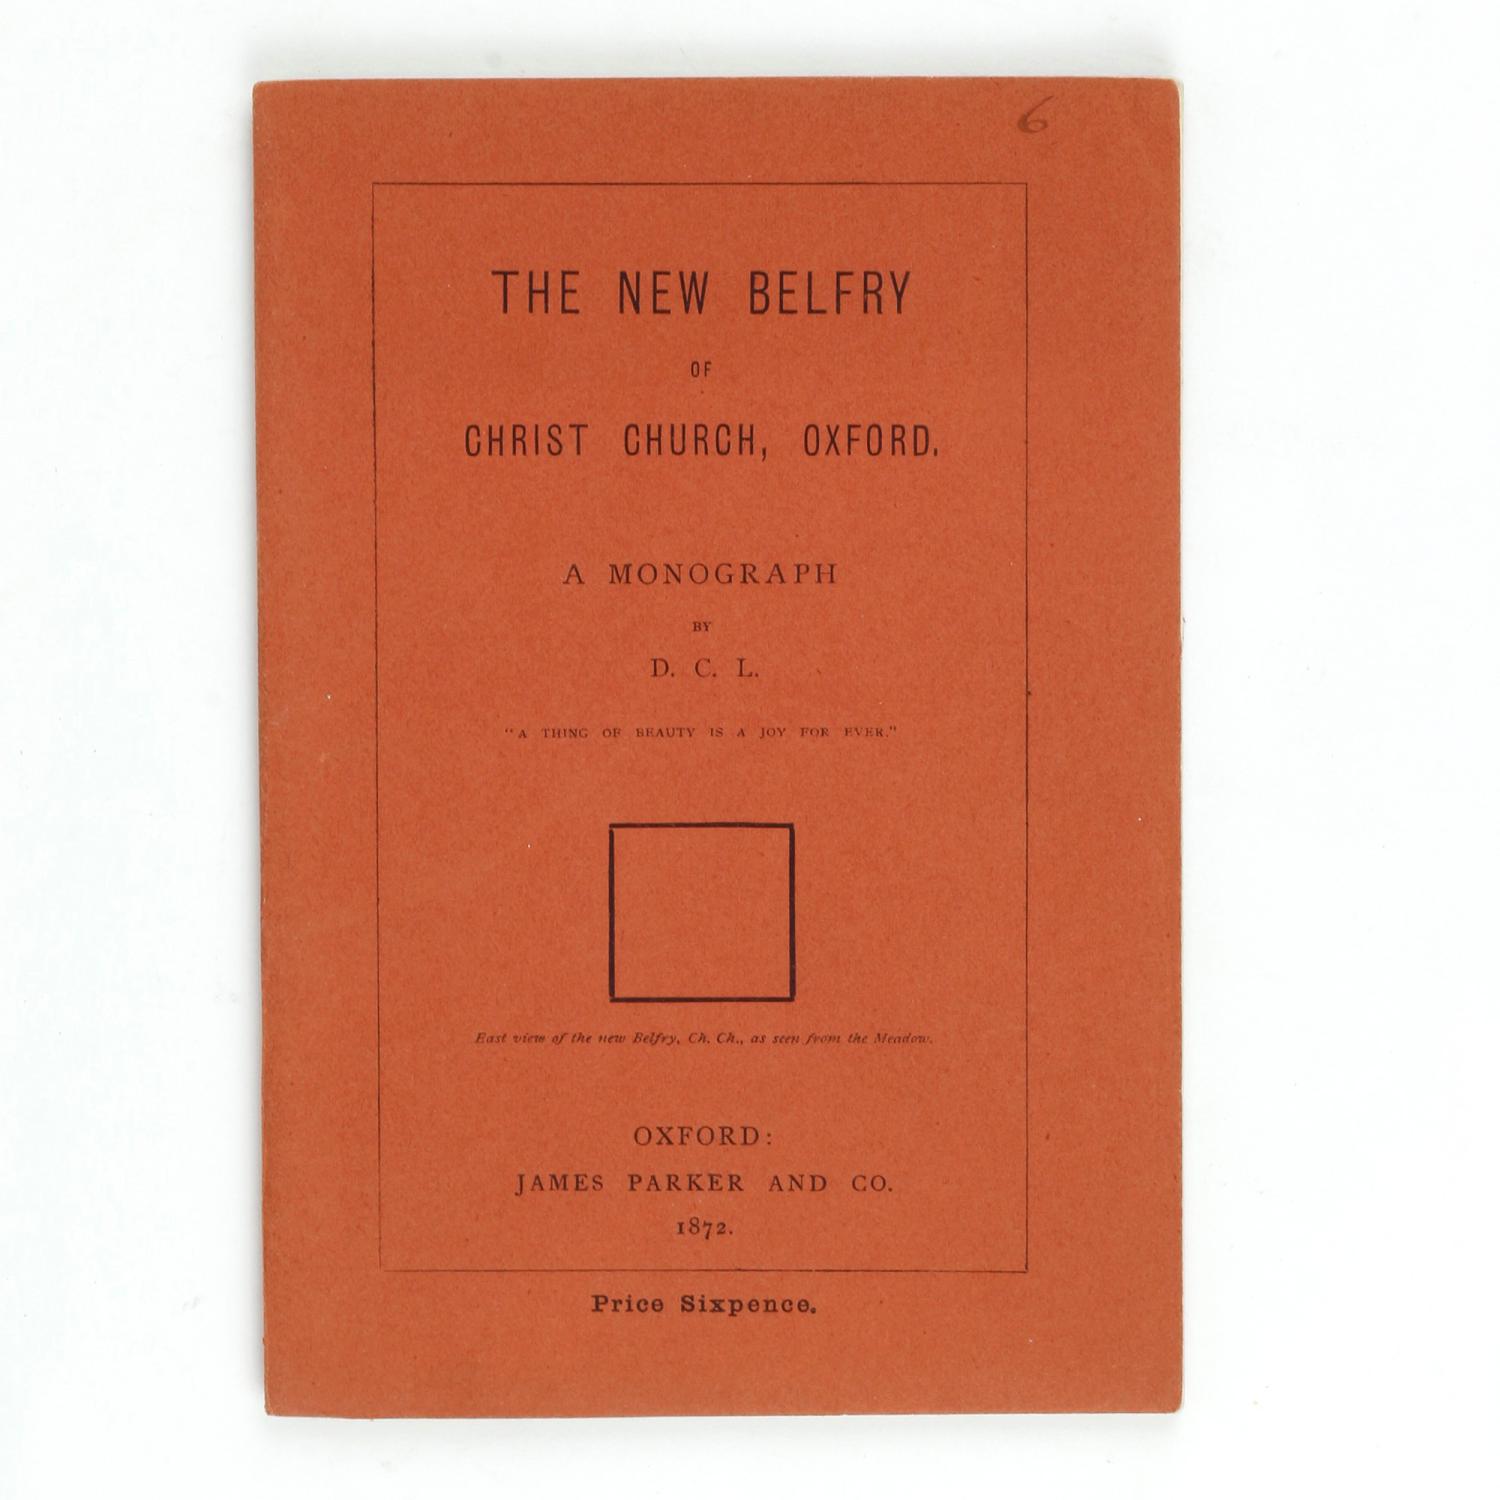 THE NEW BELFRY Of Christ Church, Oxford. A Monograph by D.C.L.